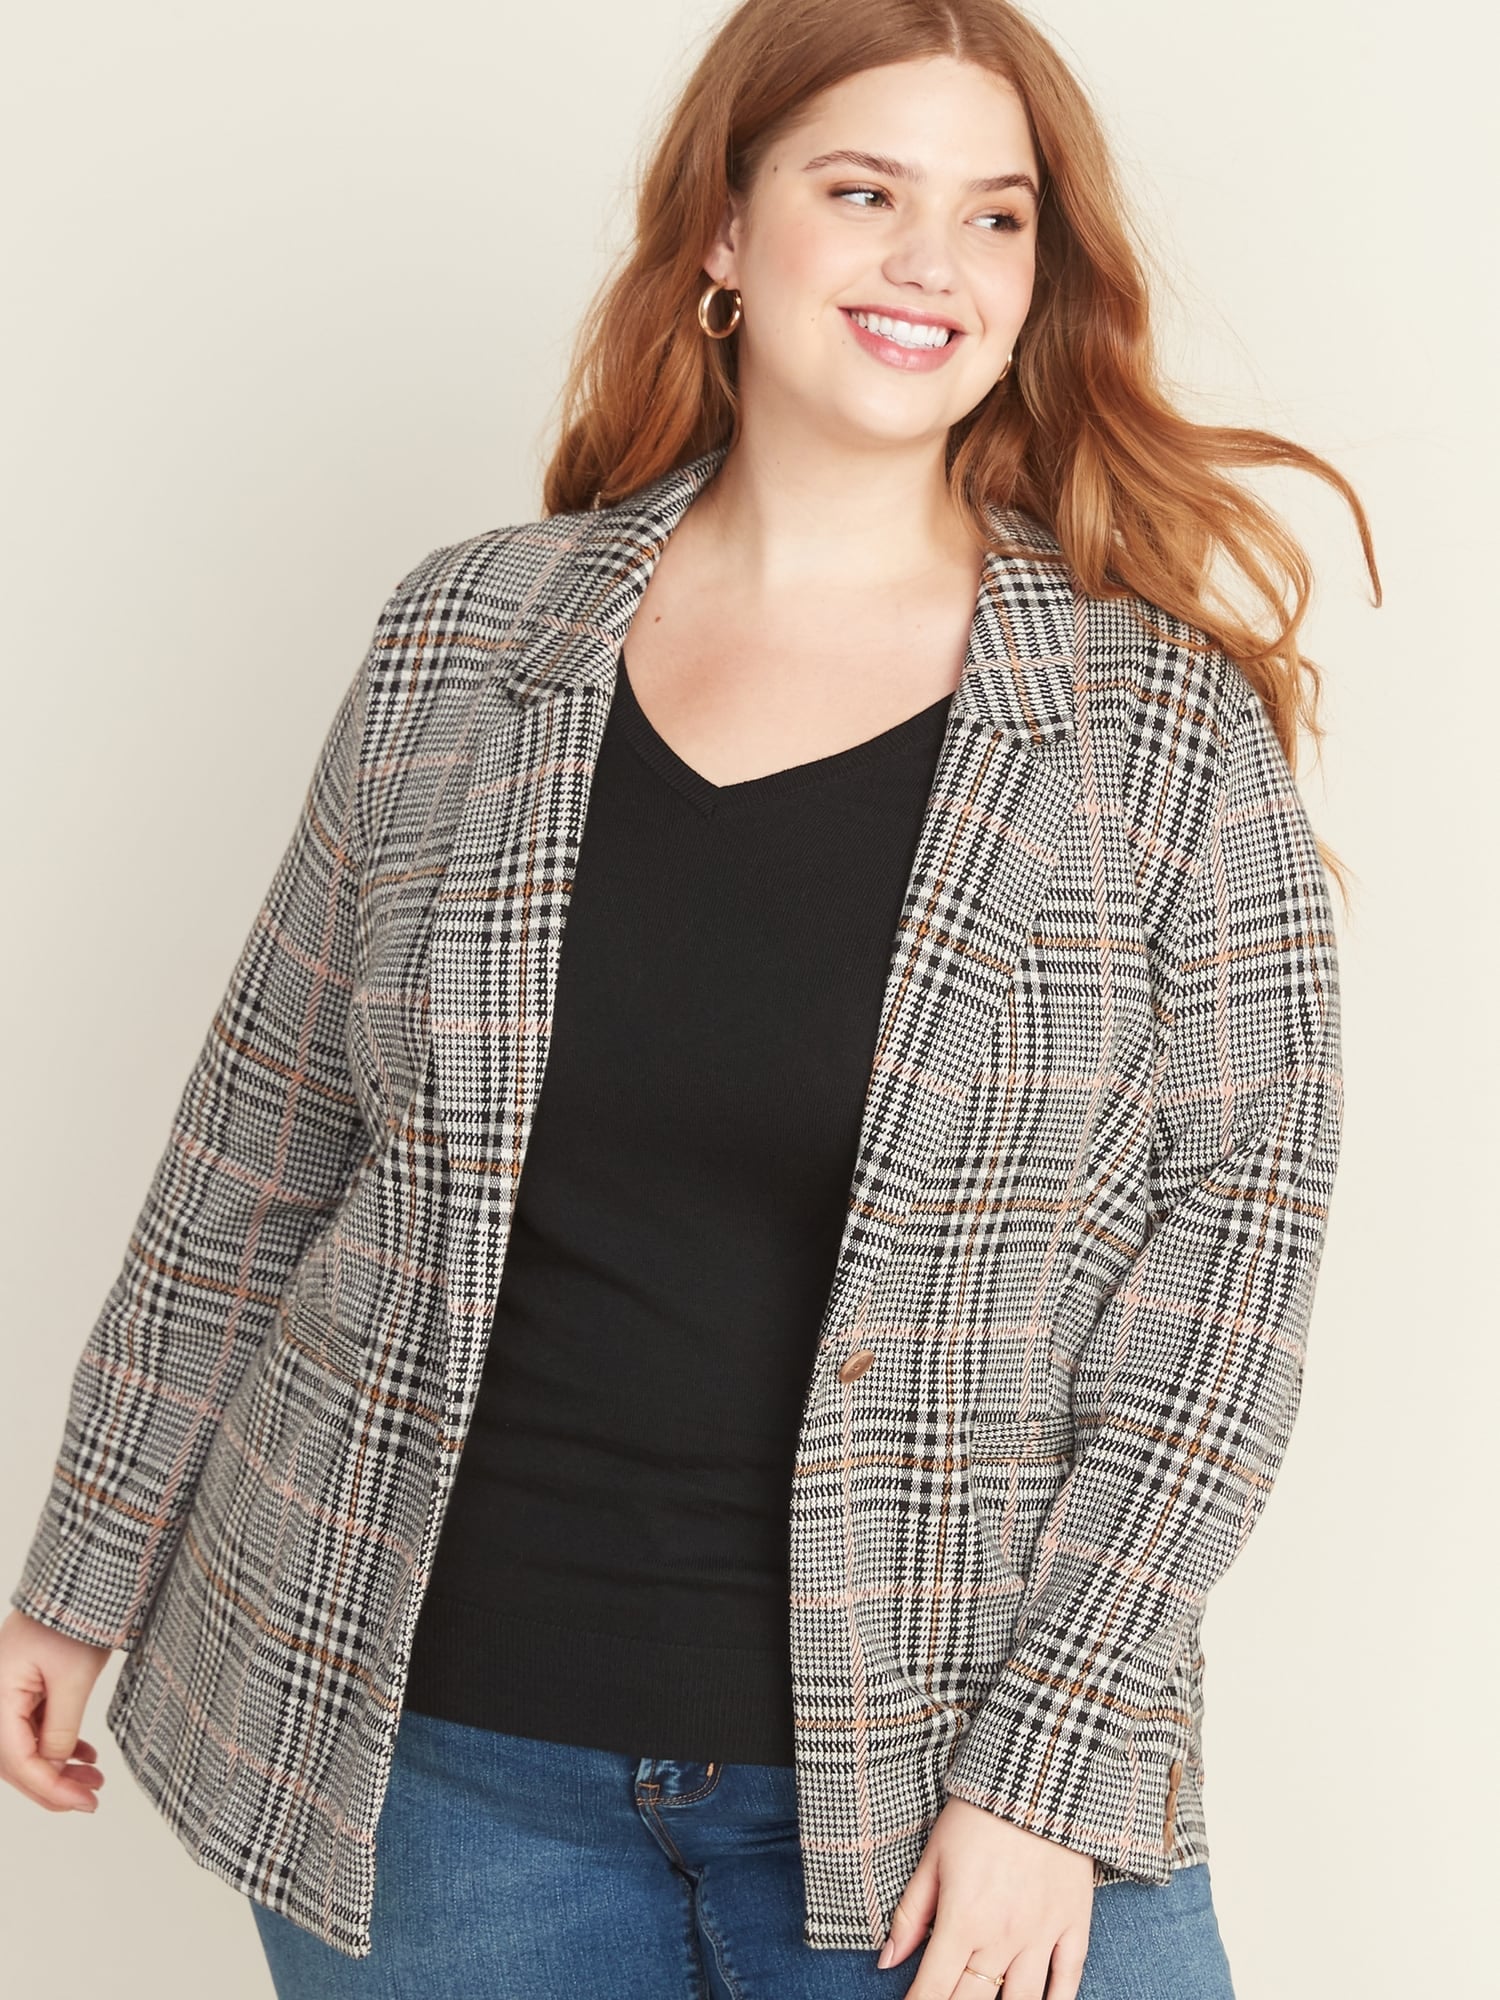 Old Navy Plus-Size Boyfriend Blazer | I'm Shopping Editor, and Here's What I'm Buying at Old Navy This Week | POPSUGAR Fashion Photo 8